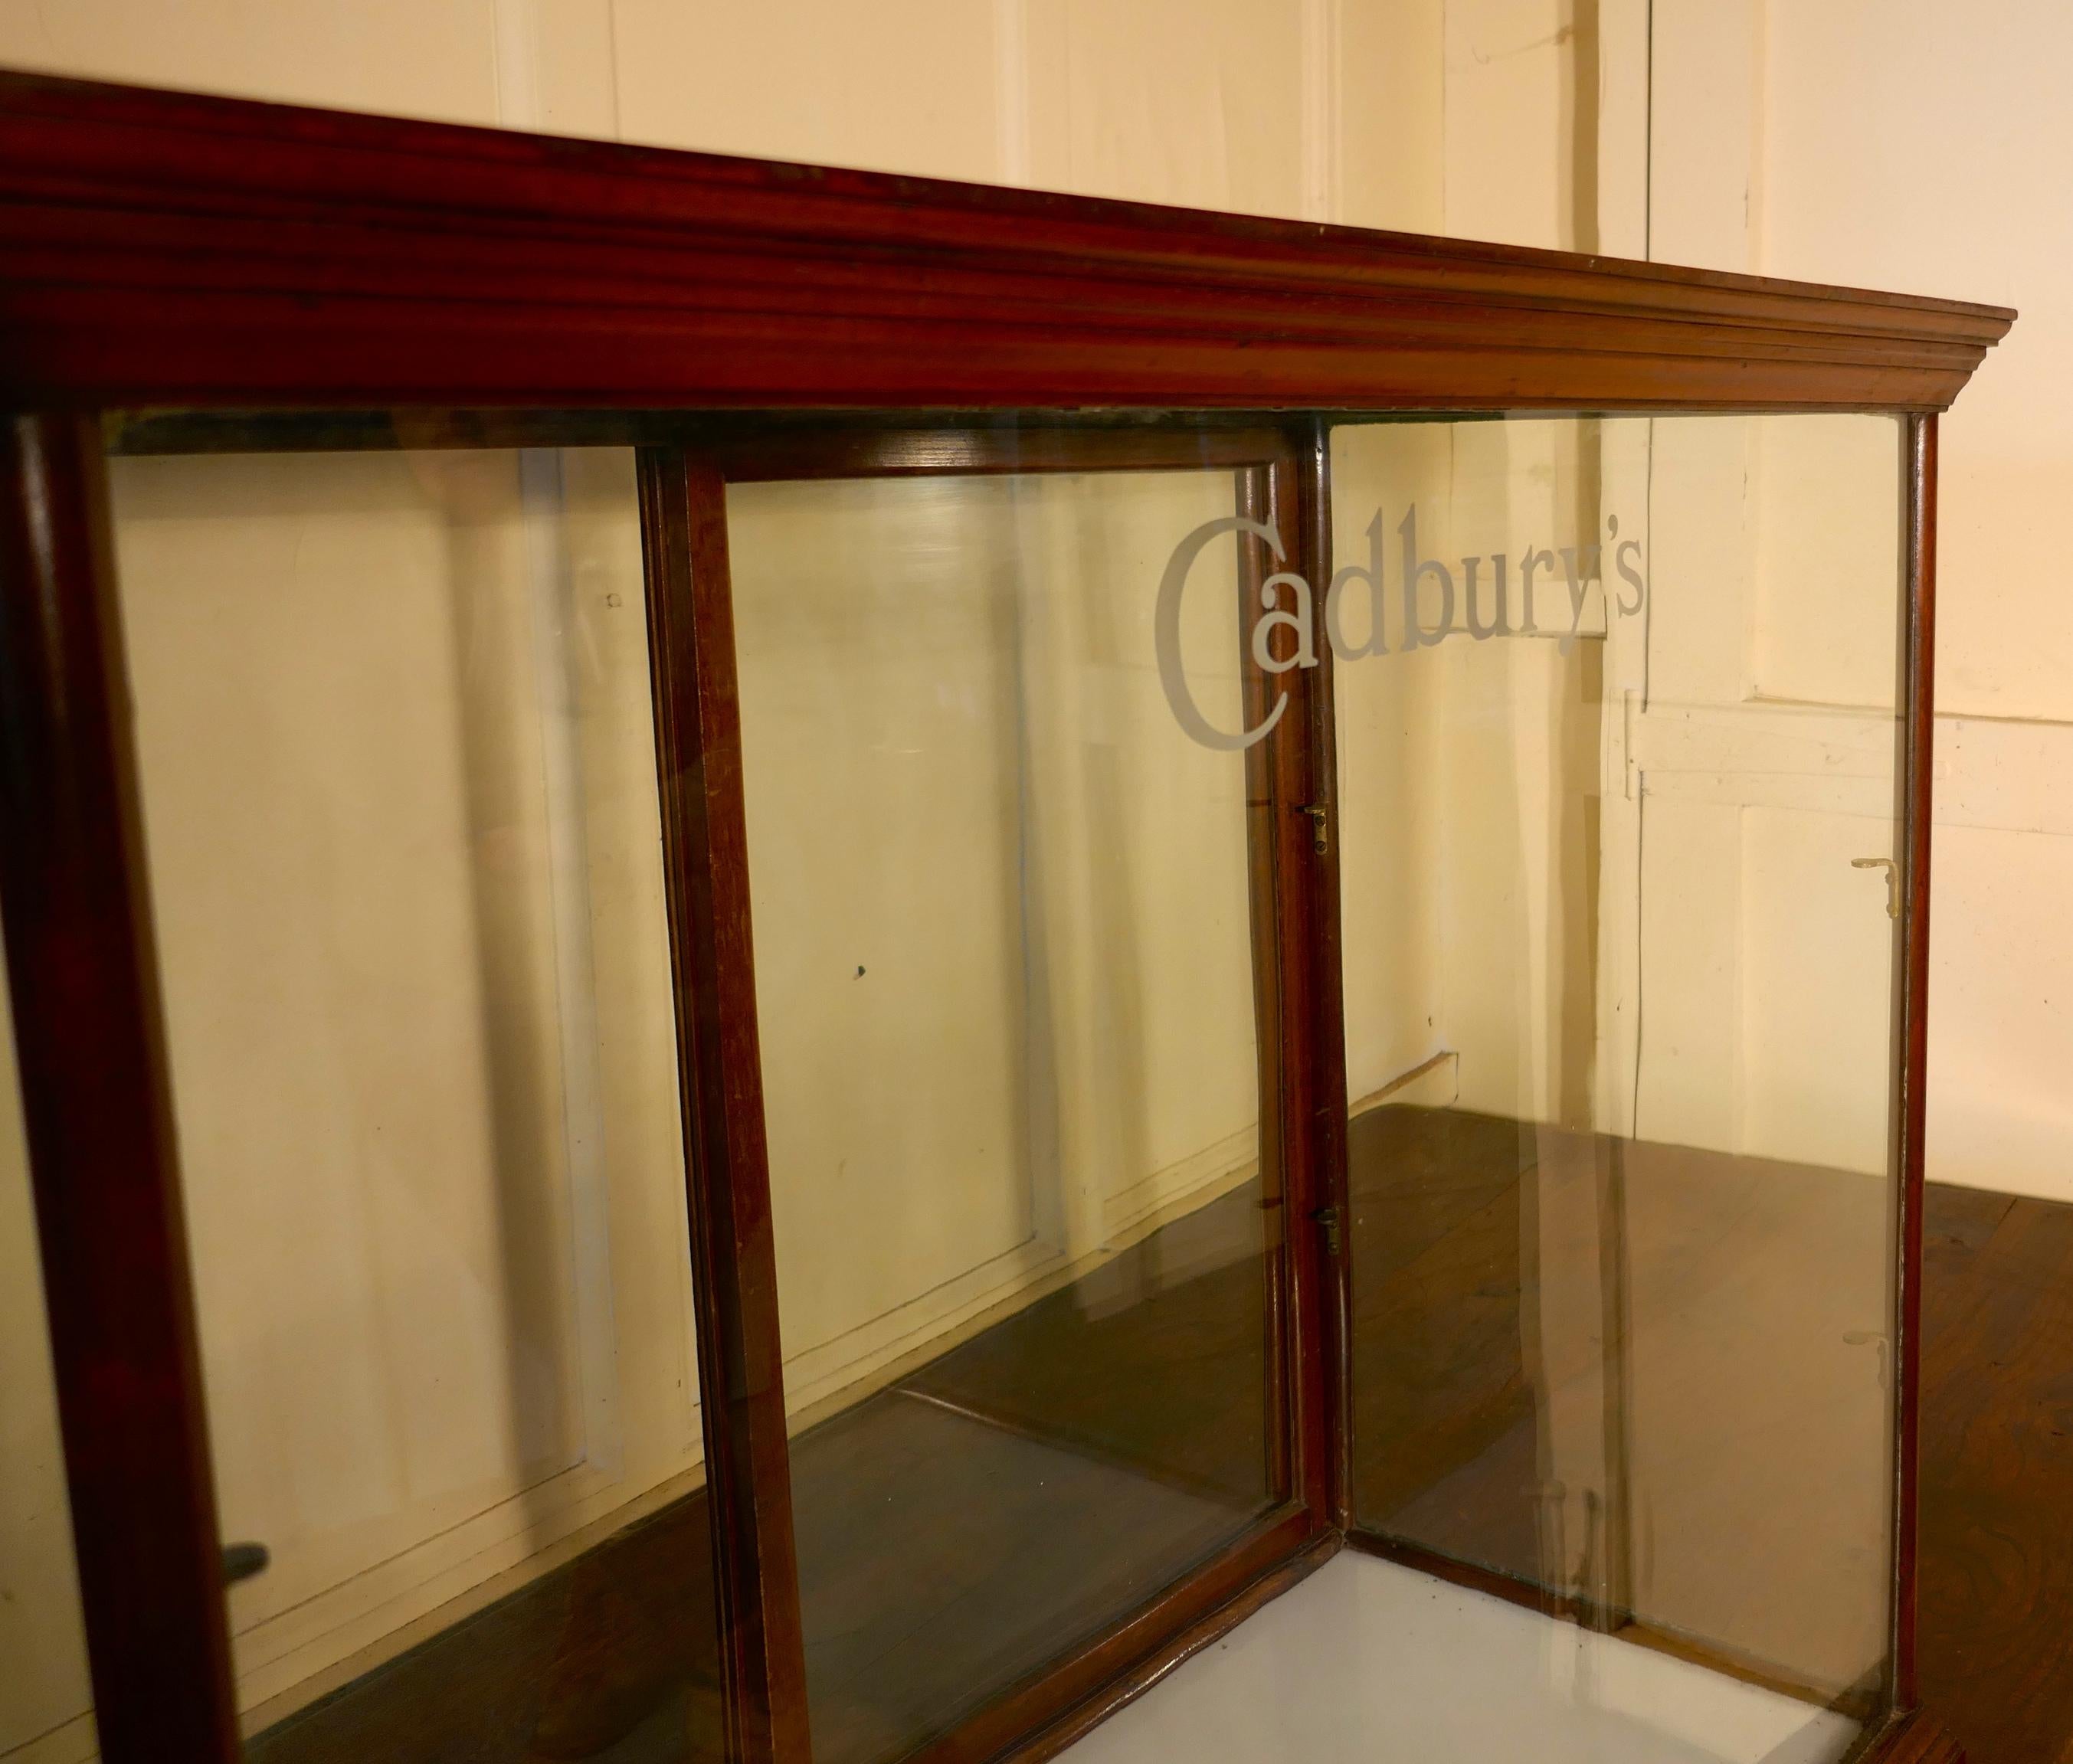 Edwardian Cadbury’s Counter Top Sweet Shop Display Cabinet In Good Condition For Sale In Chillerton, Isle of Wight